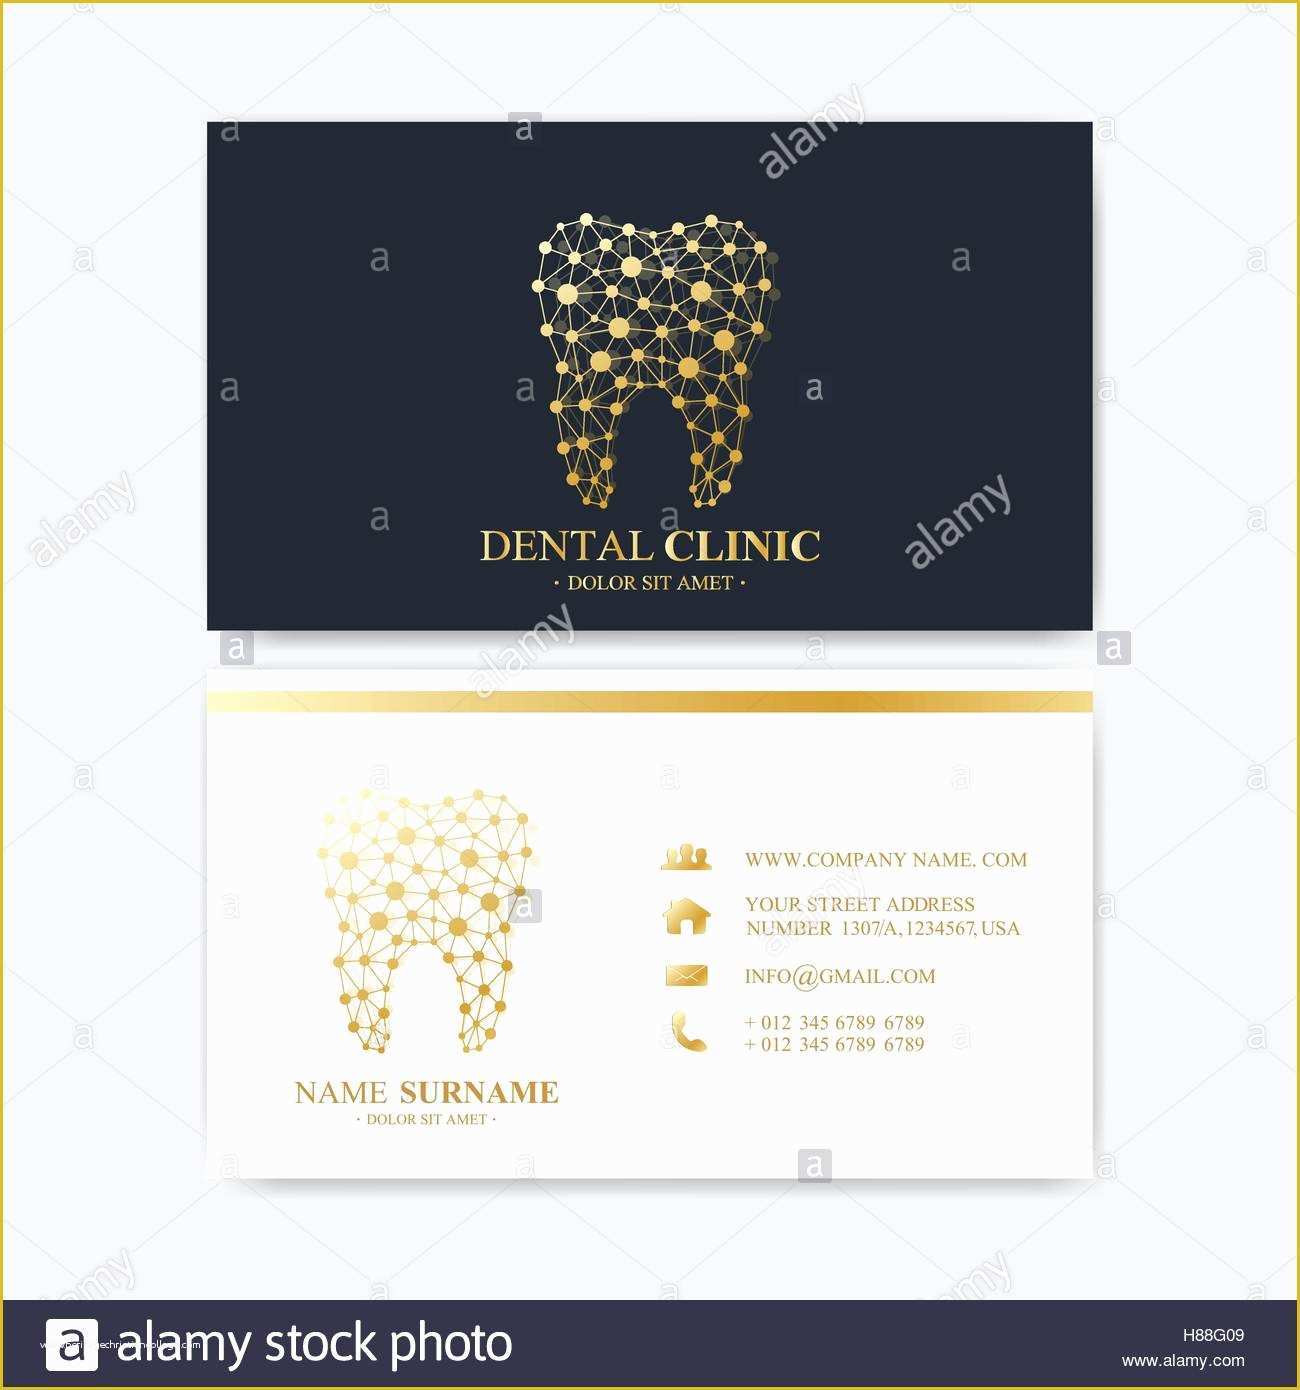 Dentist Business Card Template Free Of Premium Business Card Print Template Visiting Dental